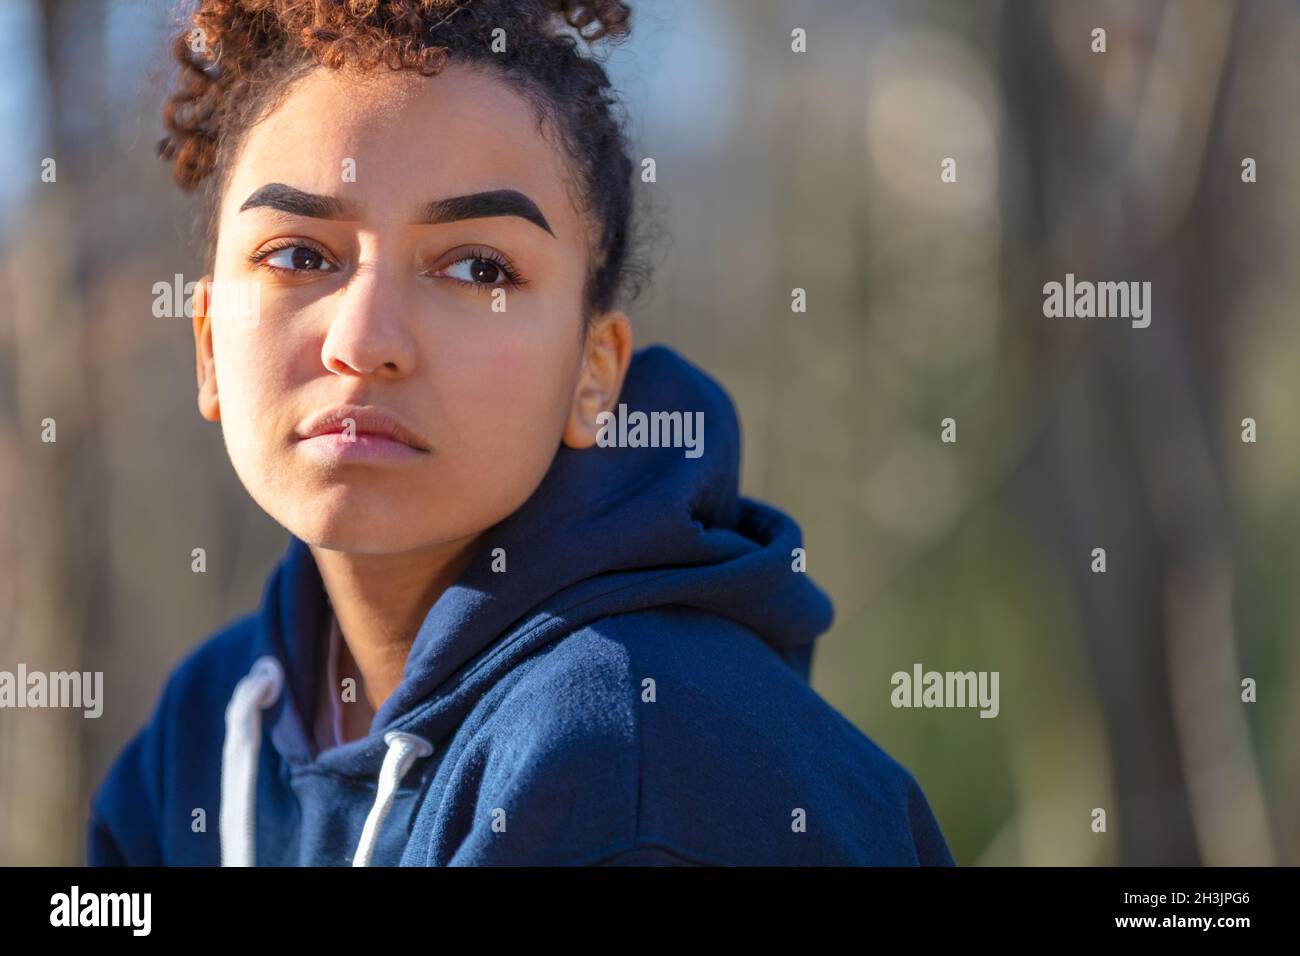 Outdoor portrait of sad depressed or thoughtful mixed race biracial African American girl teenager female young woman wearing a blue hoodie Stock Photo